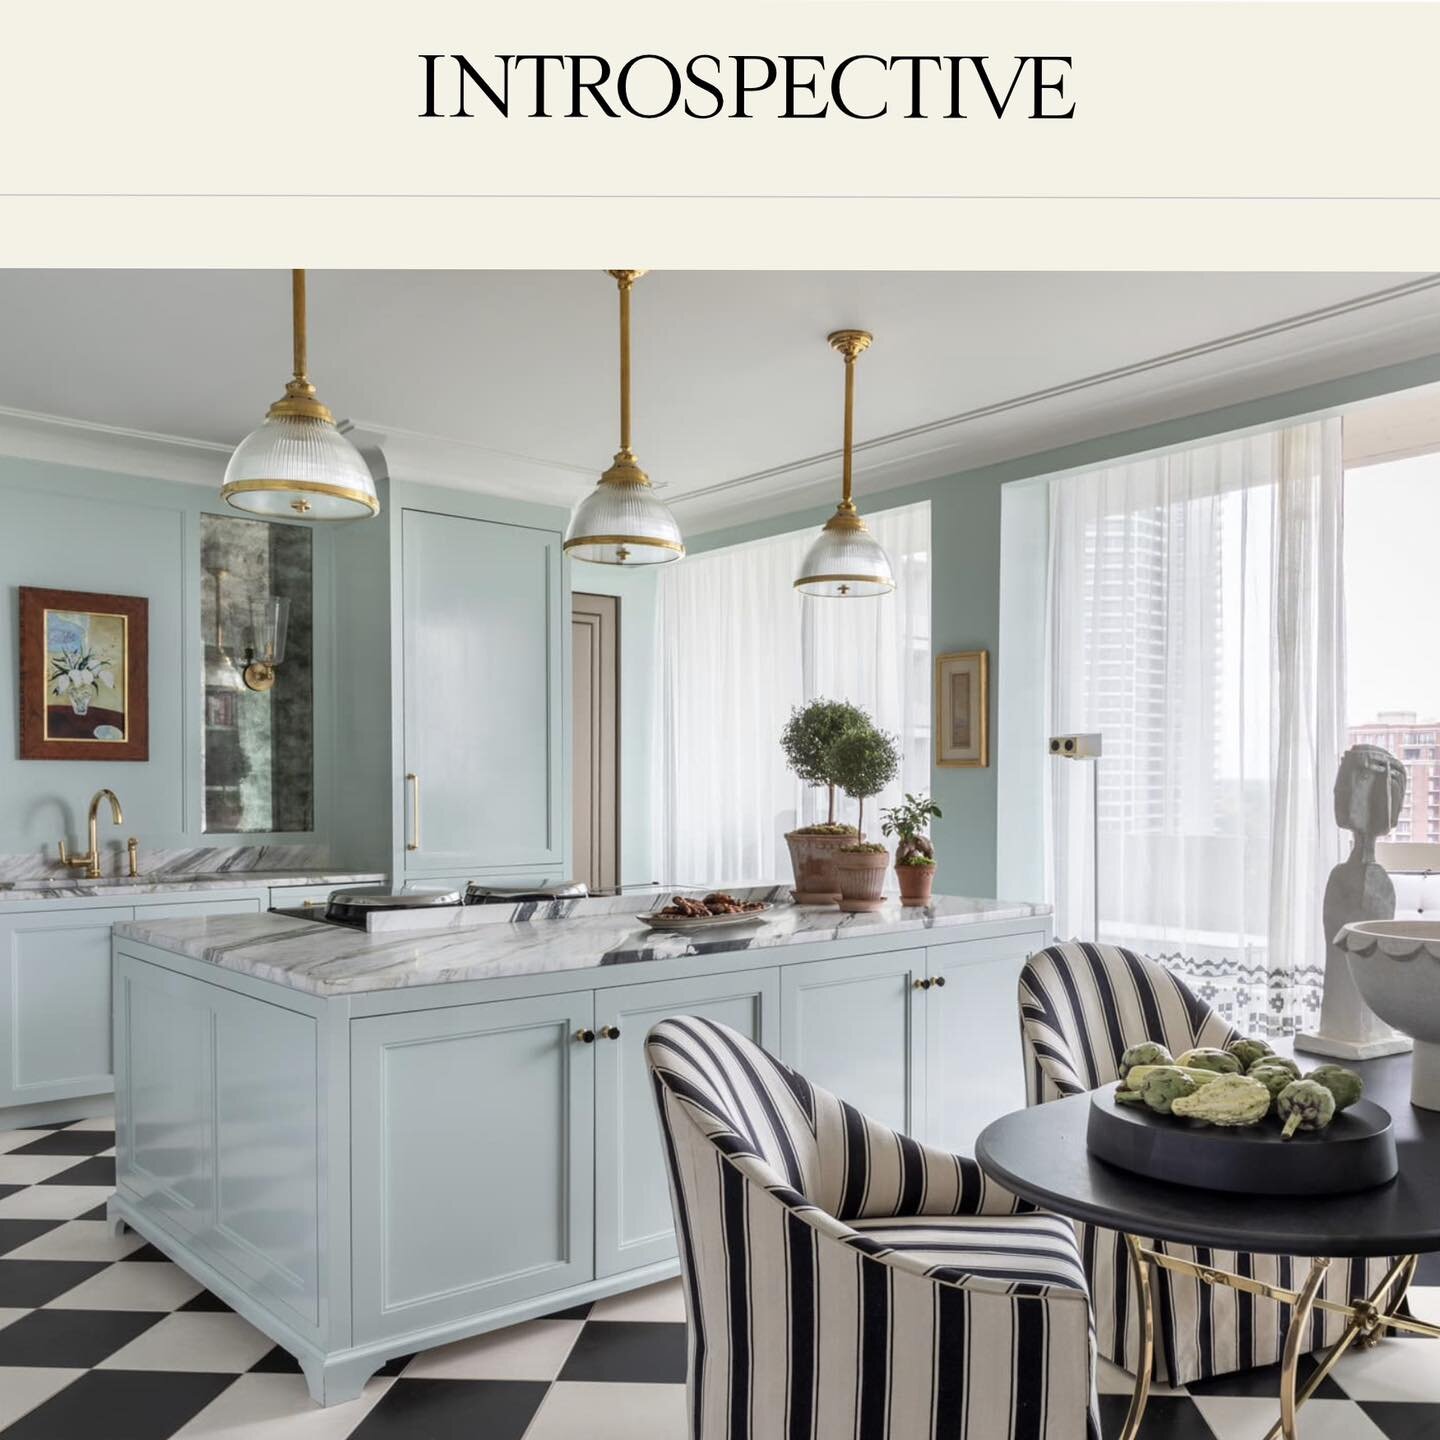 A few years ago, I was commissioned to create Jamdani window treatments for Katie Walker's home in Atlanta by the interior designer, Beth Webb. 

Recently spotted in @1stDibs magazine, Introspective, I was excited to see my Jamdani in her beautifully